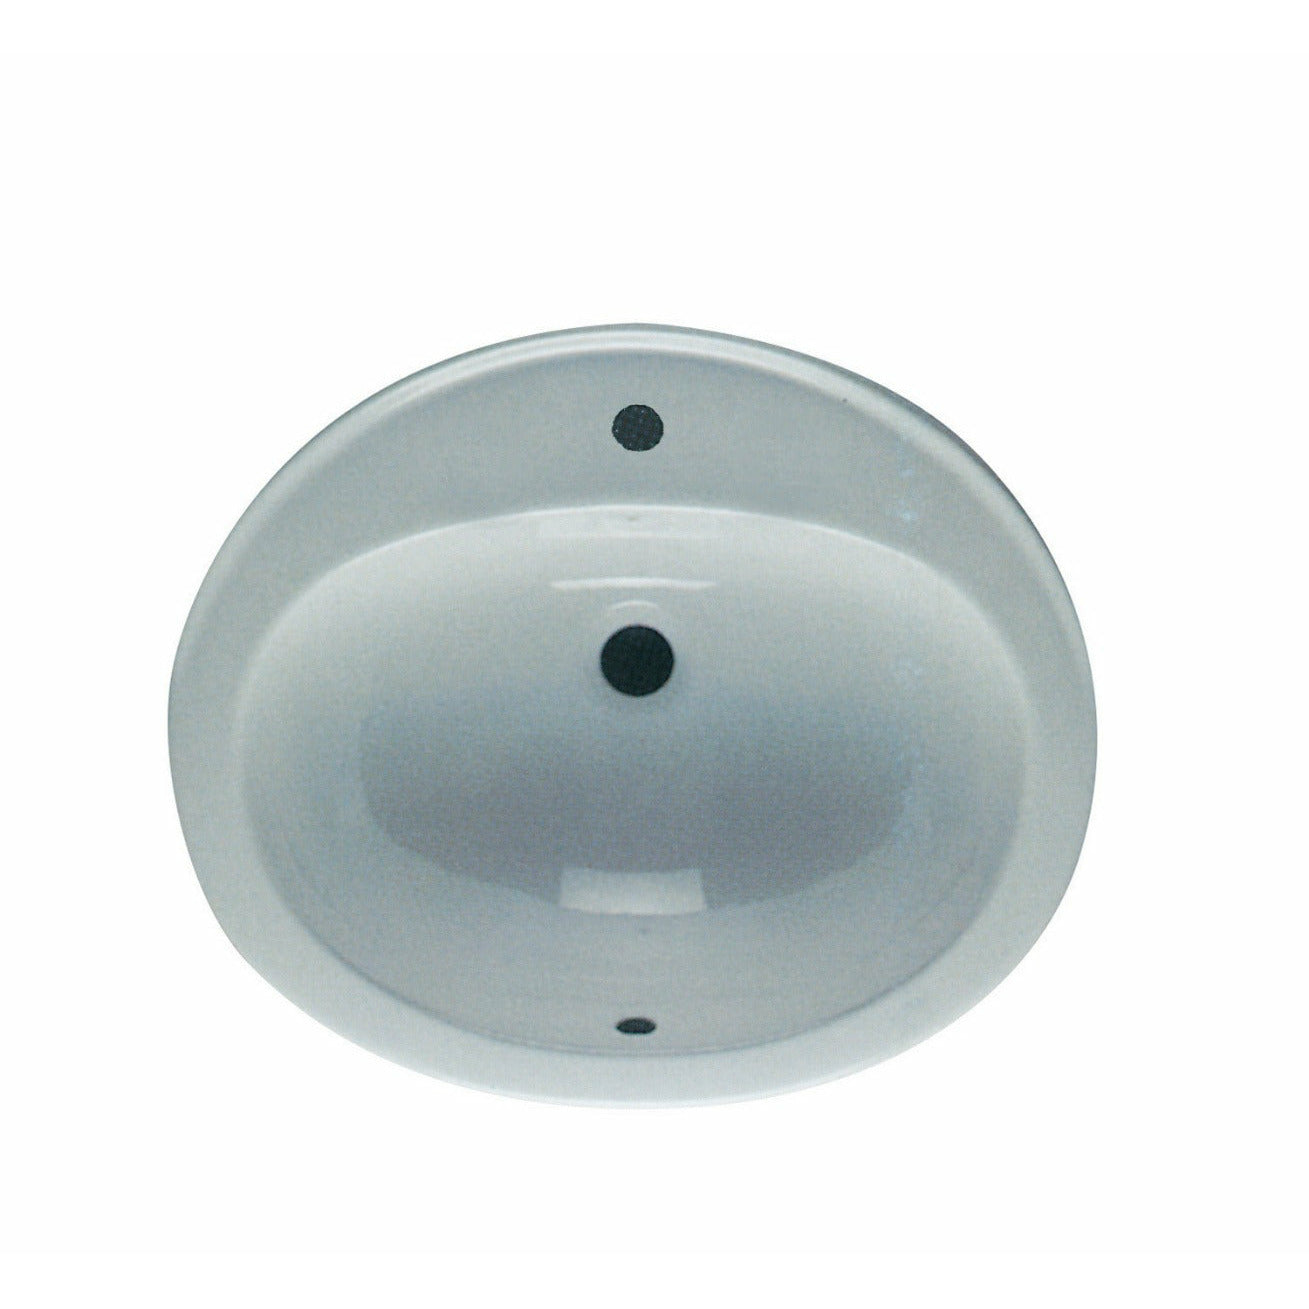 Frontline White Maria 560mm Over-the-Counter Basin - 1 Tap Hole - Letta London - 